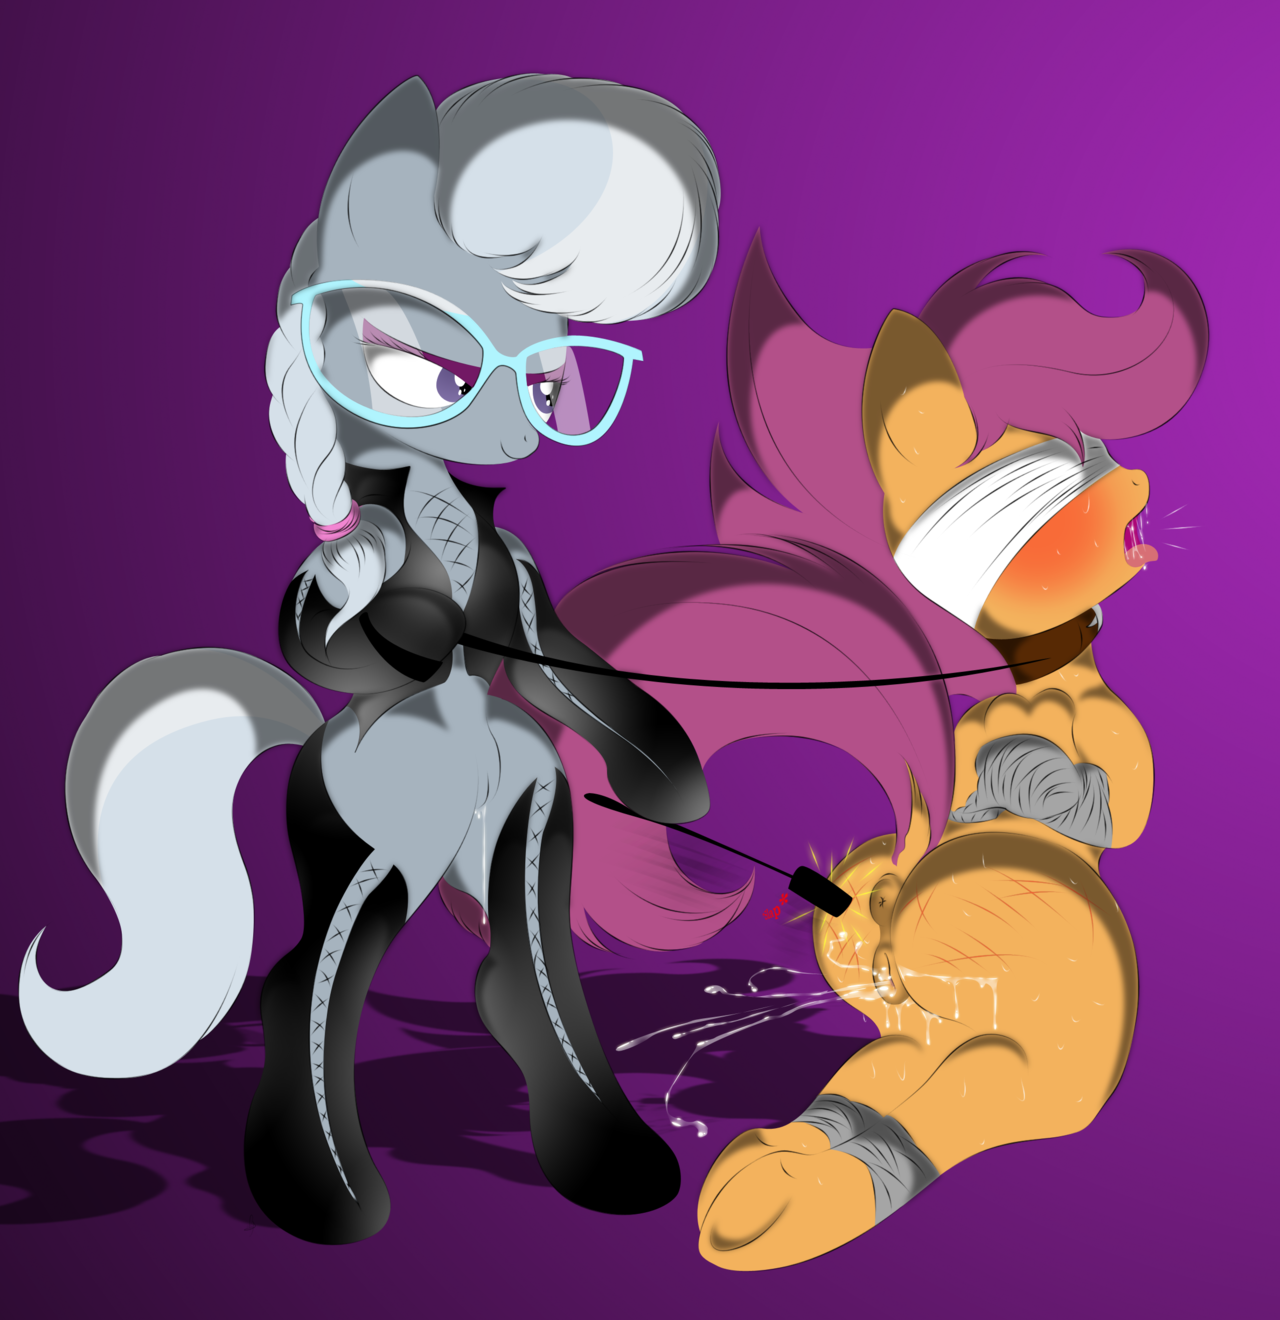 alt="Mlp Bondage. strp/02_antimozg_by_darkknightthestral-dahy8pc.png?t...